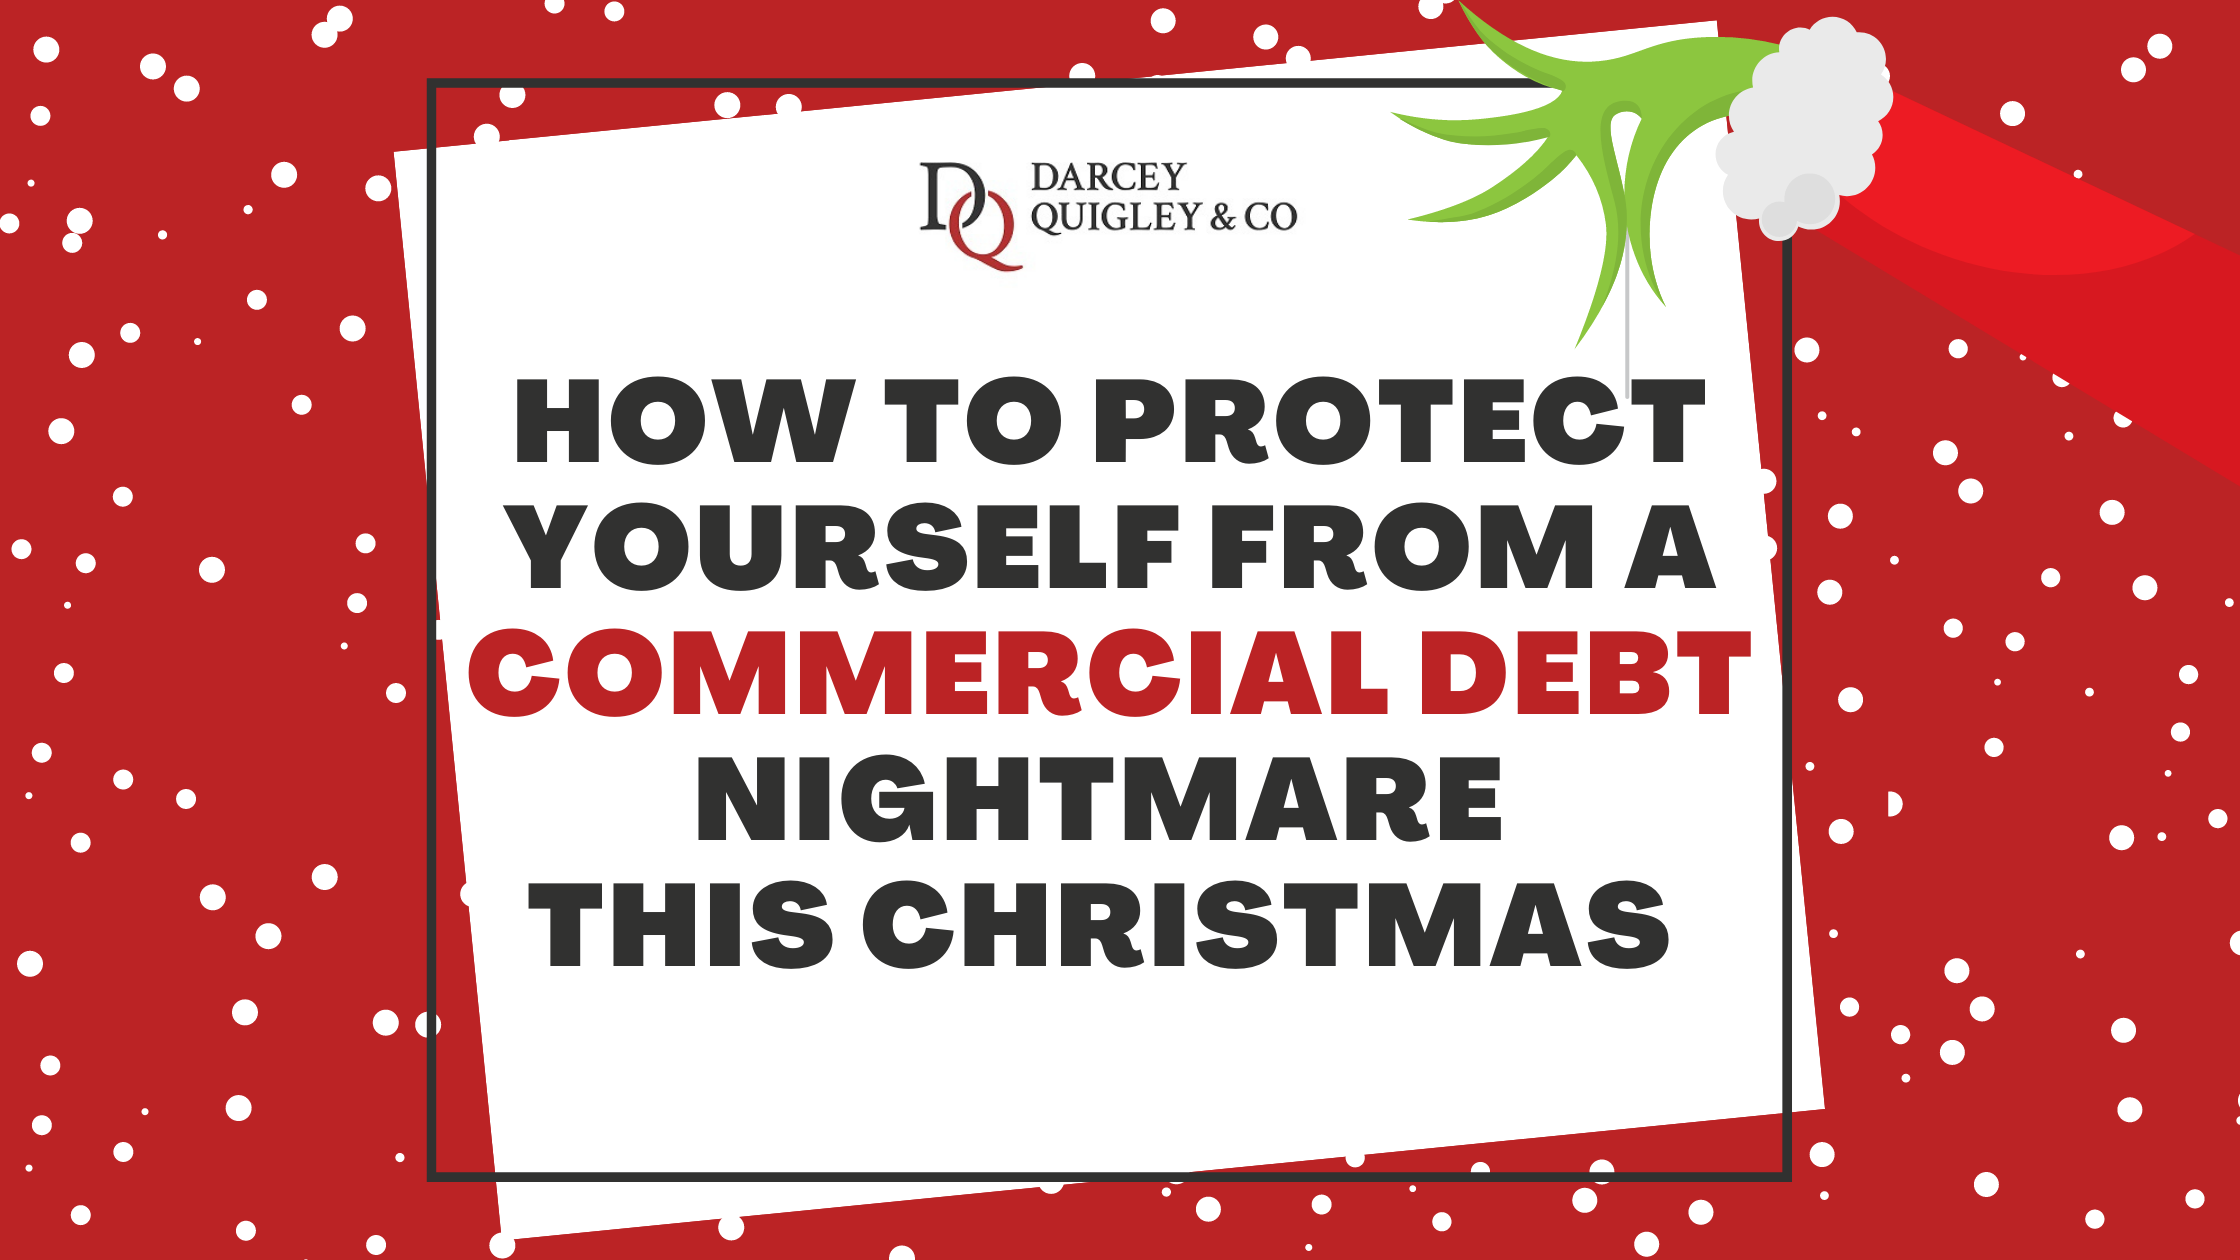 How to protect yourself from a commercial debt nightmare this Christmas